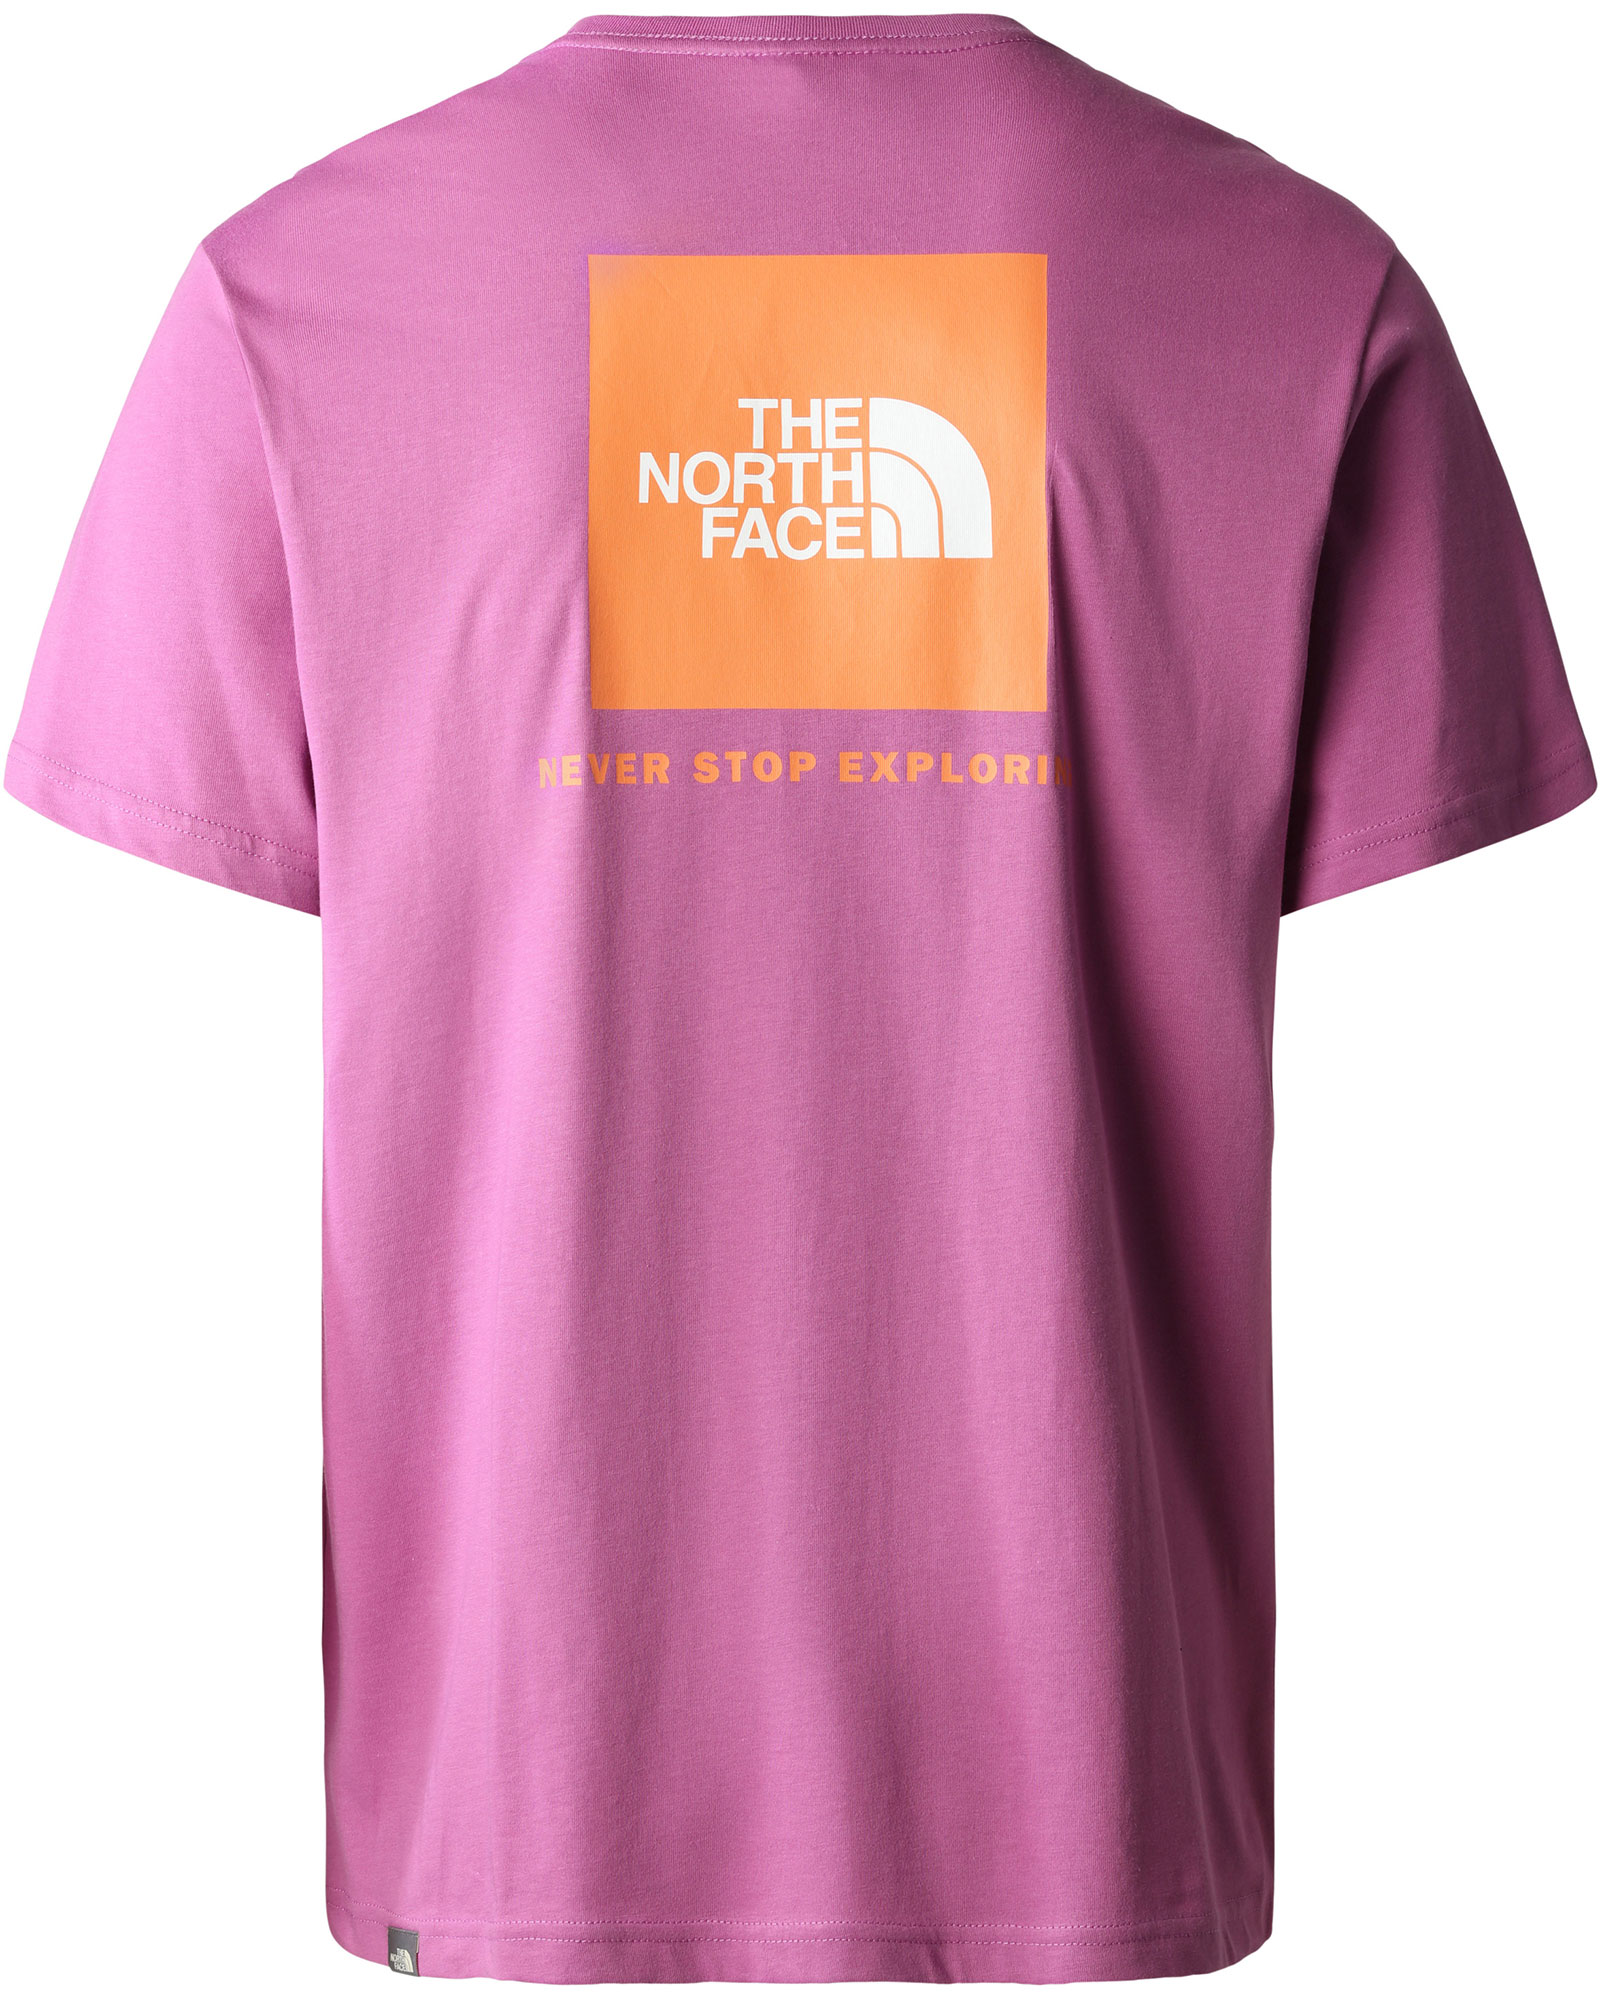 The North Face Red Box Men’s T Shirt - Purple Cactus Flower XS